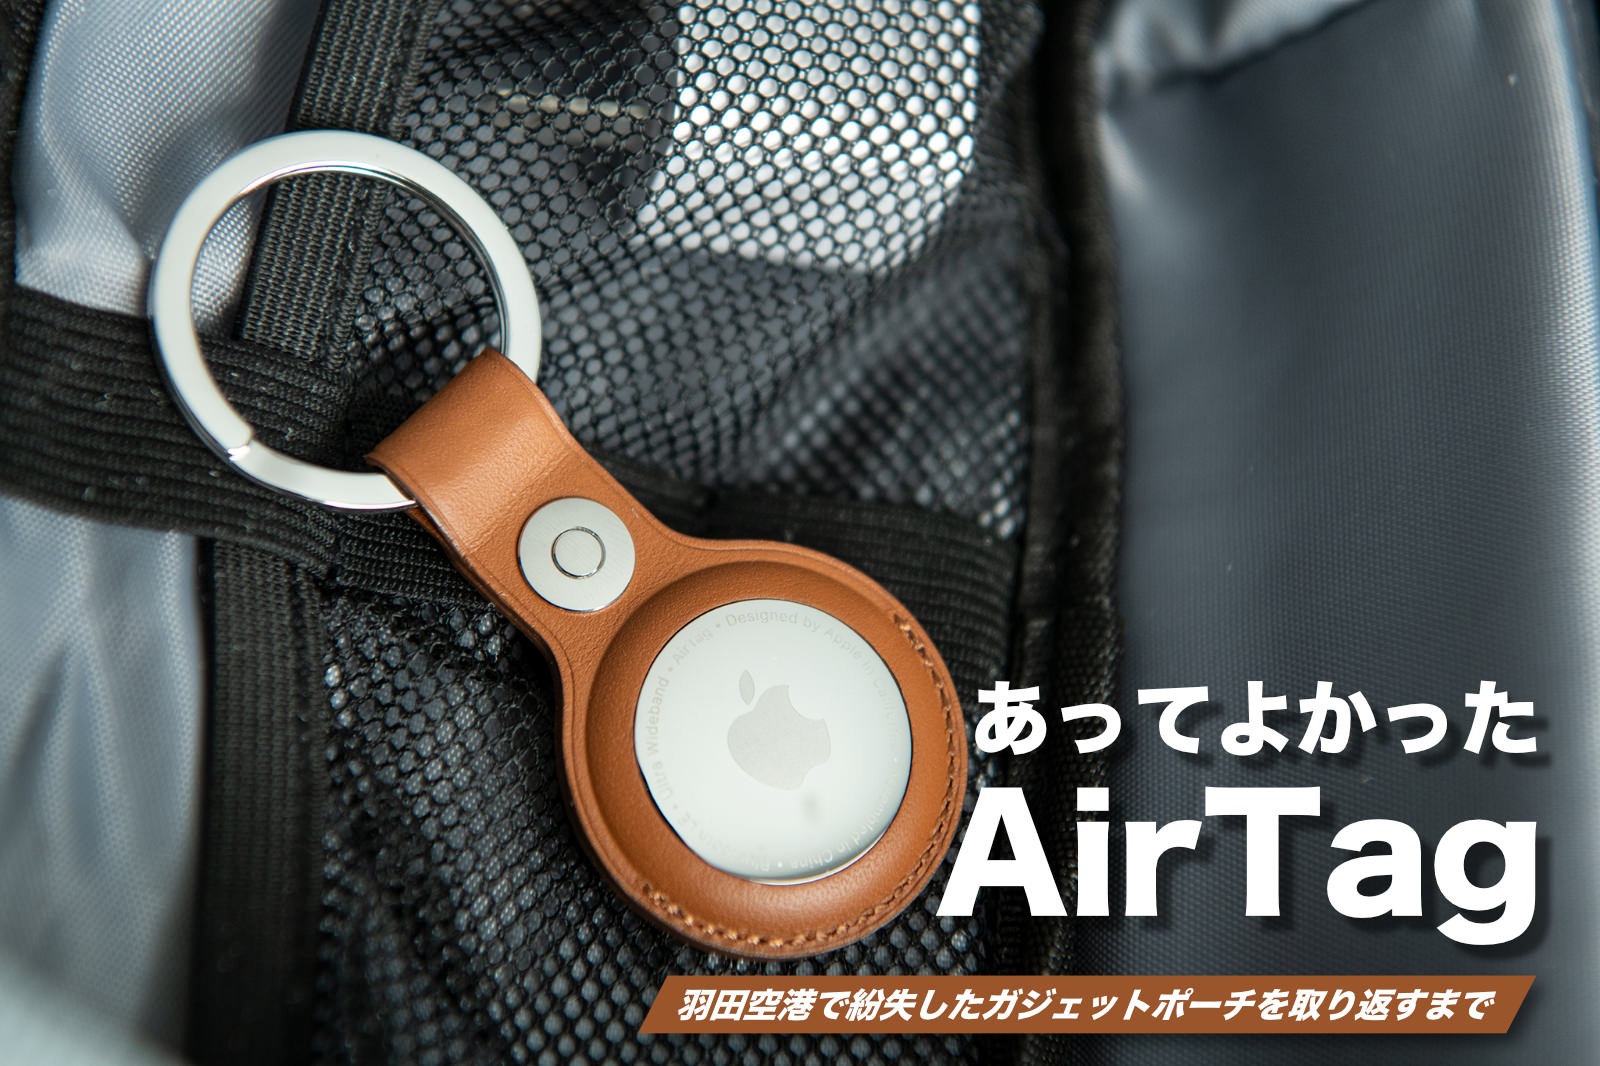 Finding-my-Gadget-Pouch-with-AirTag.jpg